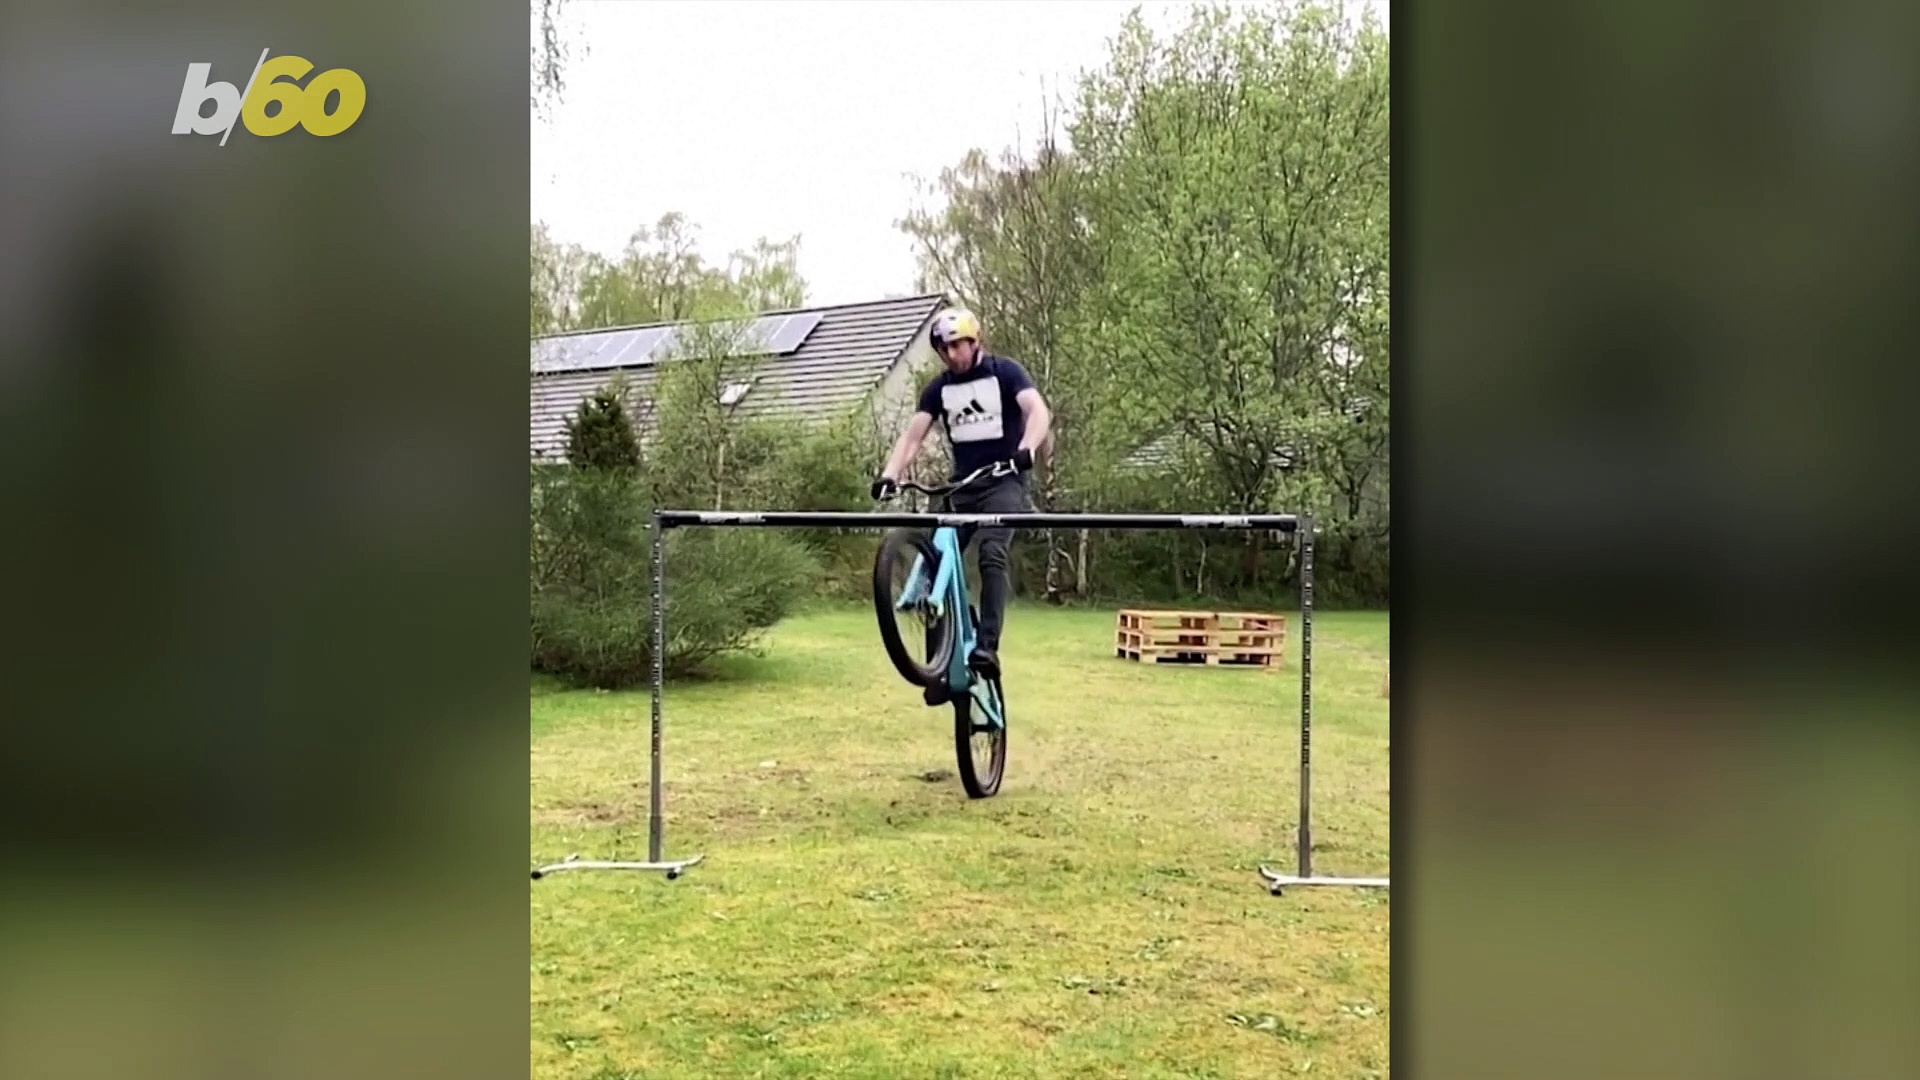 Vicious Cycle! Fun Footage Shows Cyclist in Home Garden Doing Stunts & Tricks!